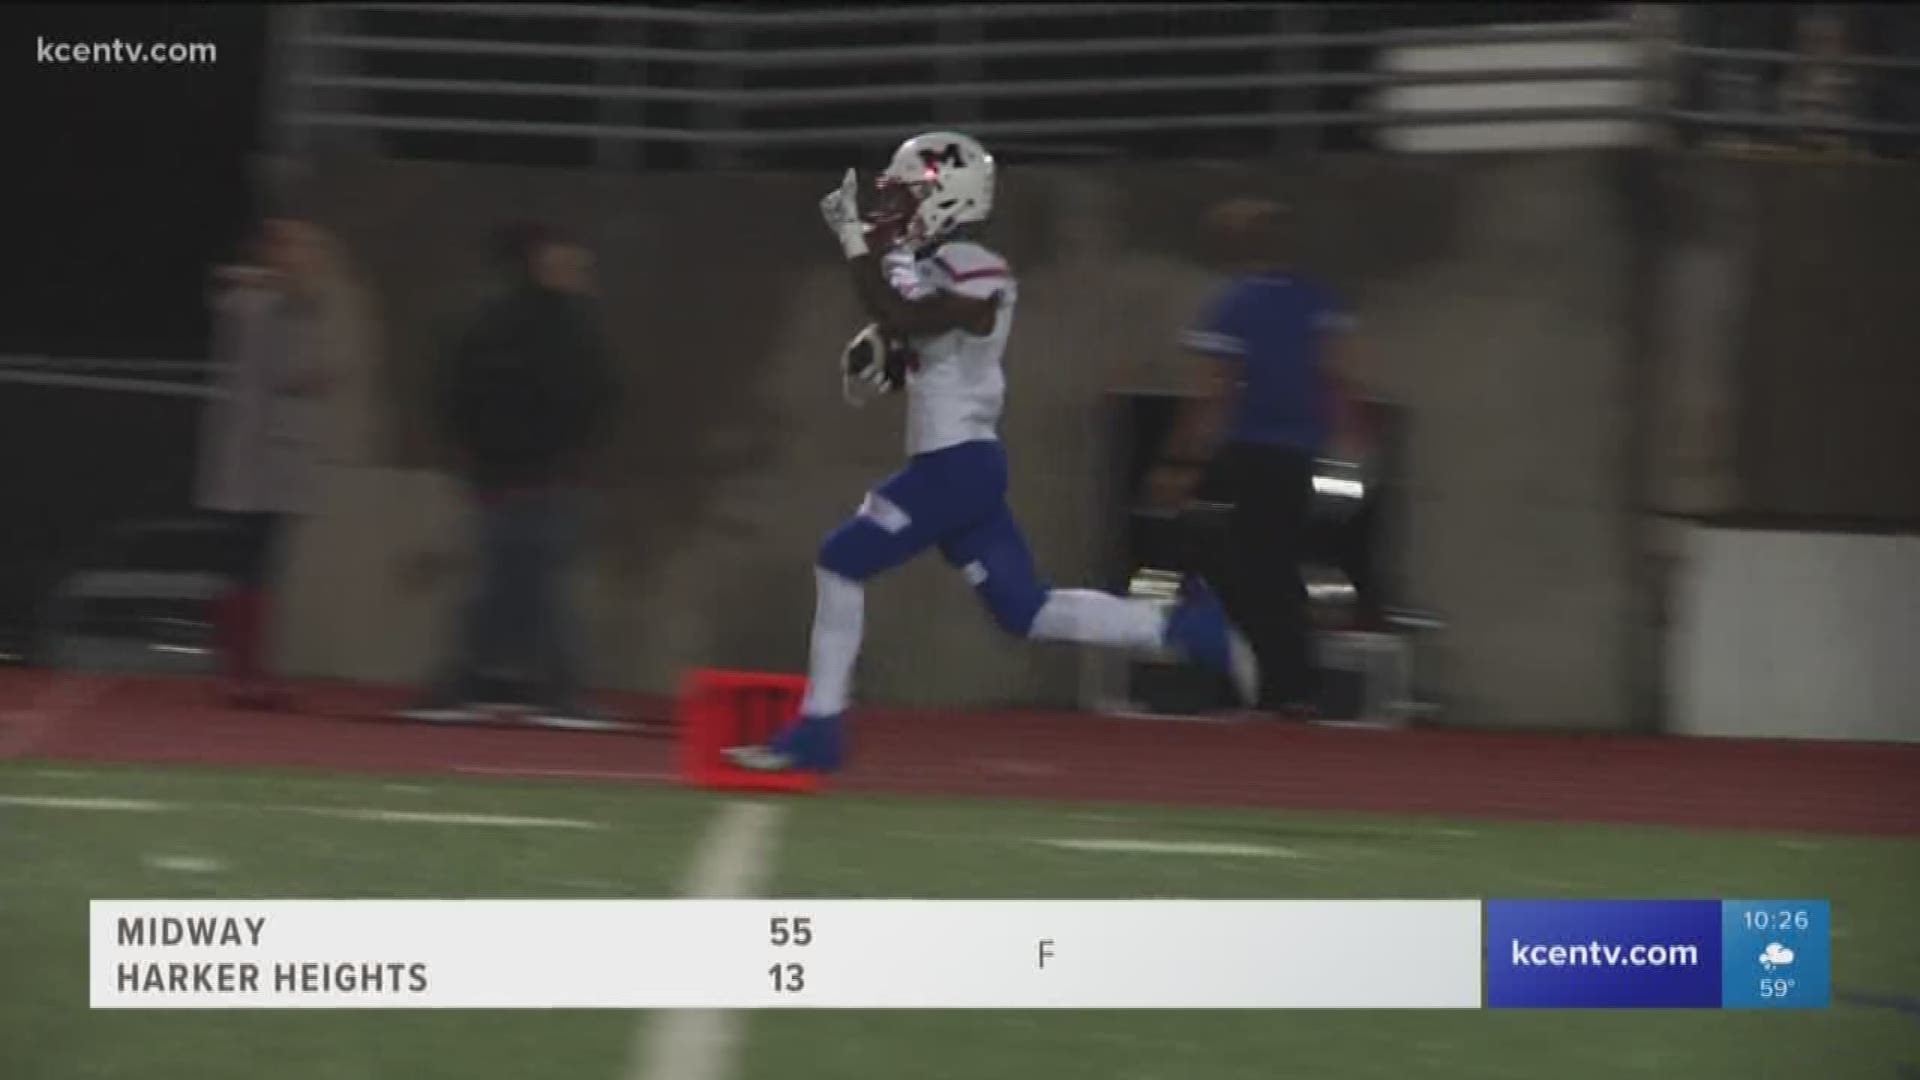 Midway came away with a 55-13 win when it squared off against Harker Heights Thursday night.